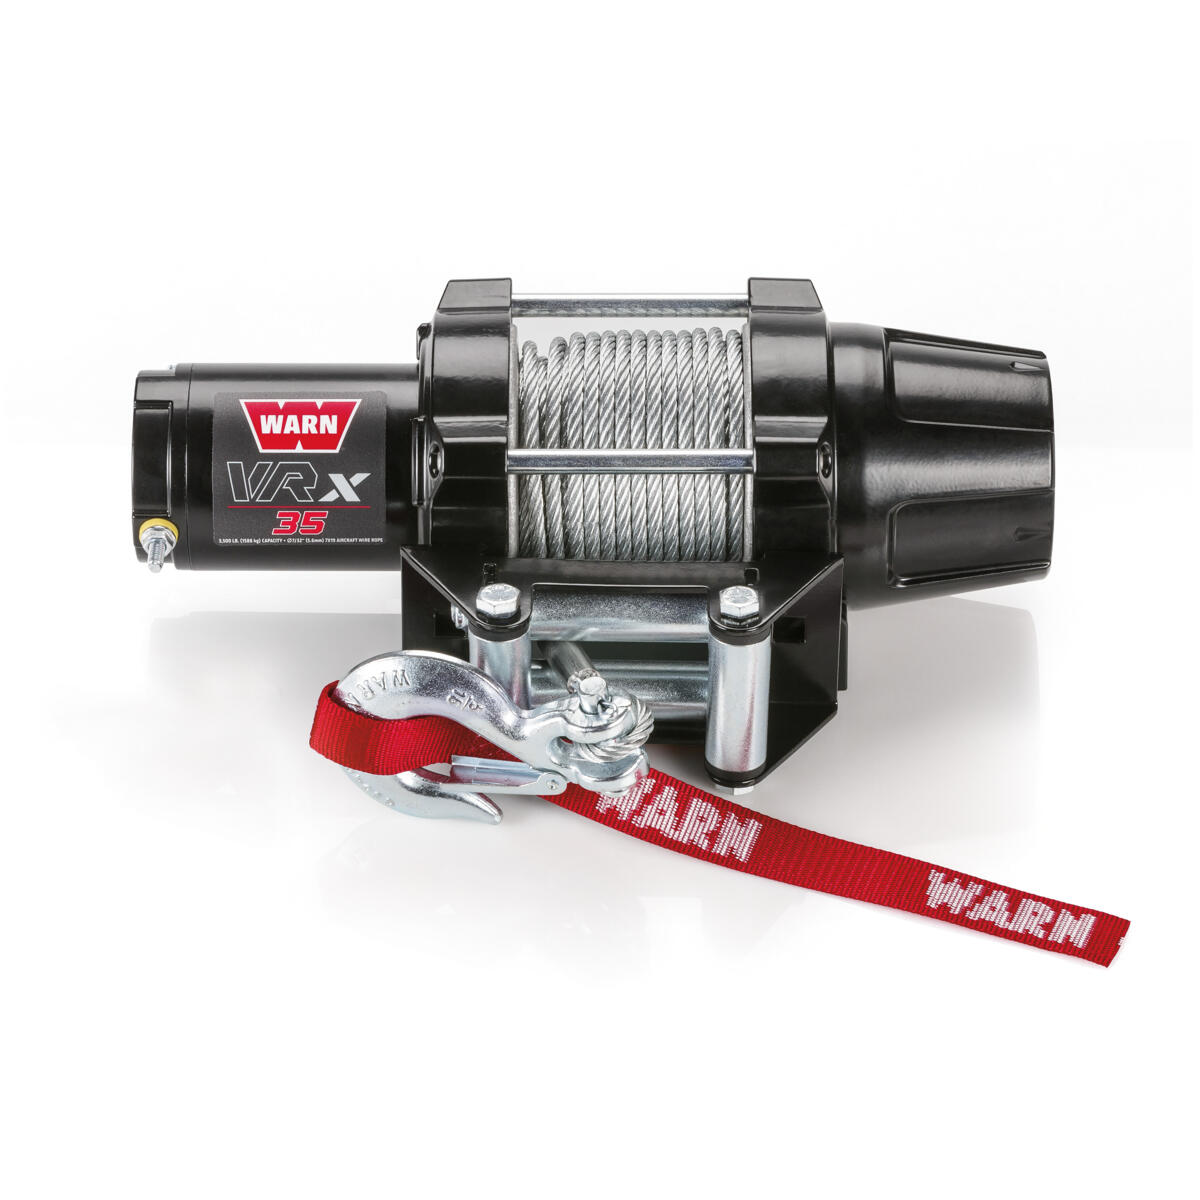 With its all-metal construction, the WARN® VRX Winch with 15.24 metres of steel wire rope includes the new clutch developed from the WARN® 4WD hub lock design.